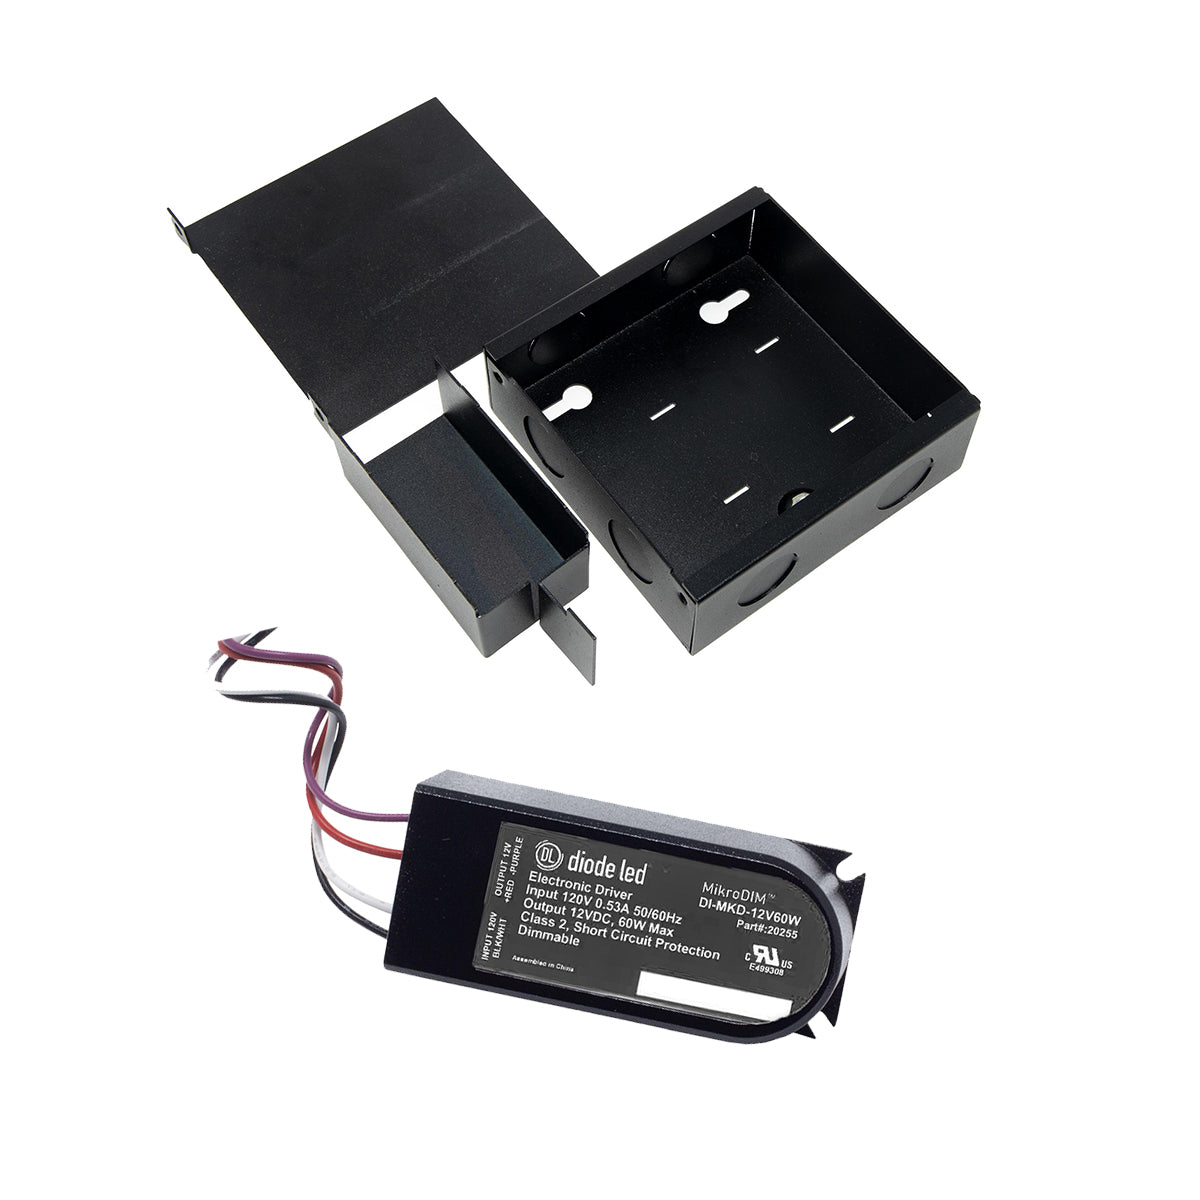 MikroDIM 60 Watts 24VDC LED Driver with Lo-Pro Junction Box, ELV Dimming, 120VAC